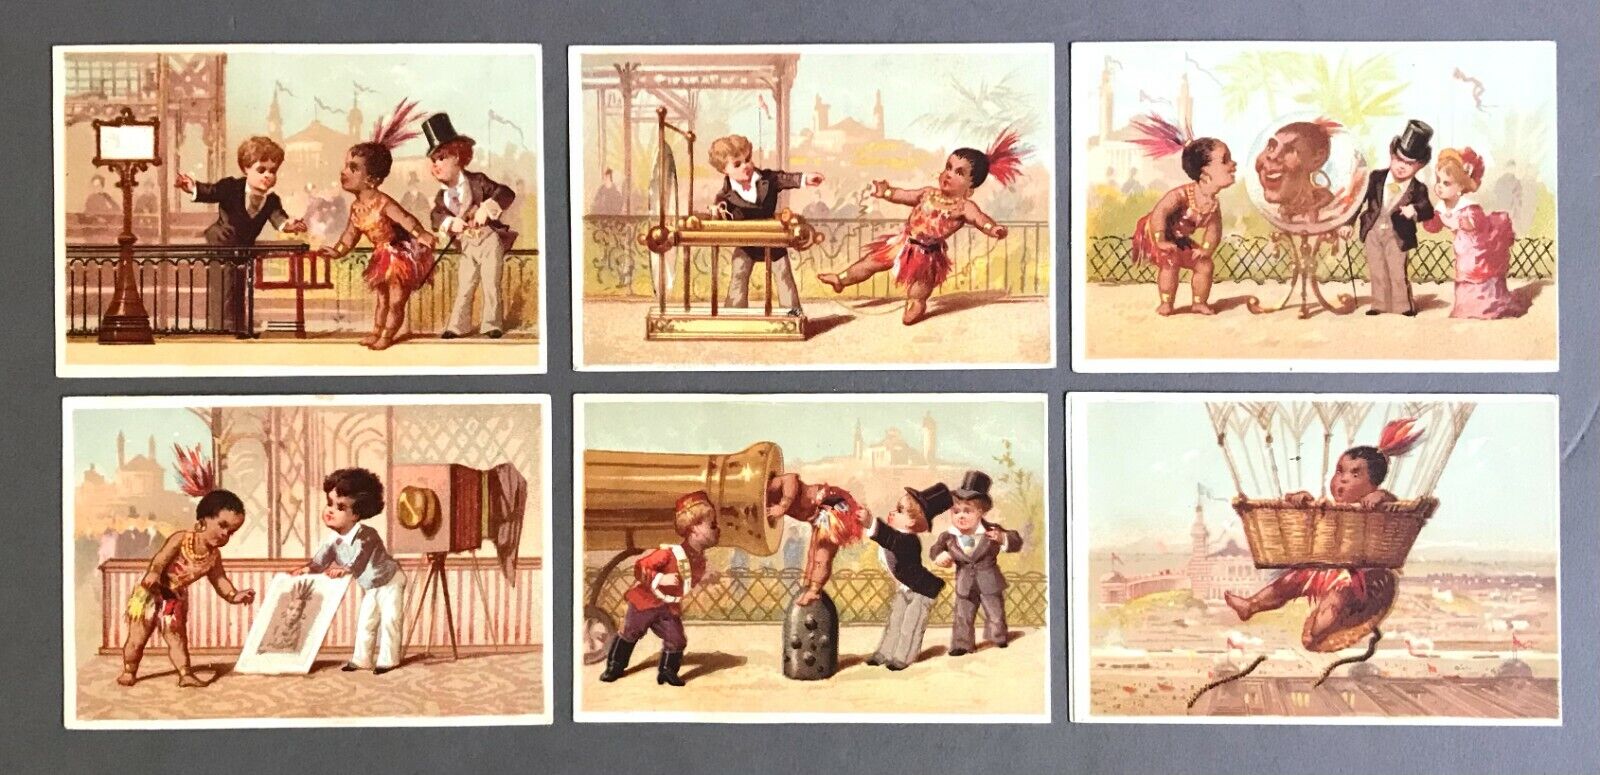 [World’s Columbia Exposition]  Group of Six Chromolithograph Trade Cards  c.1893